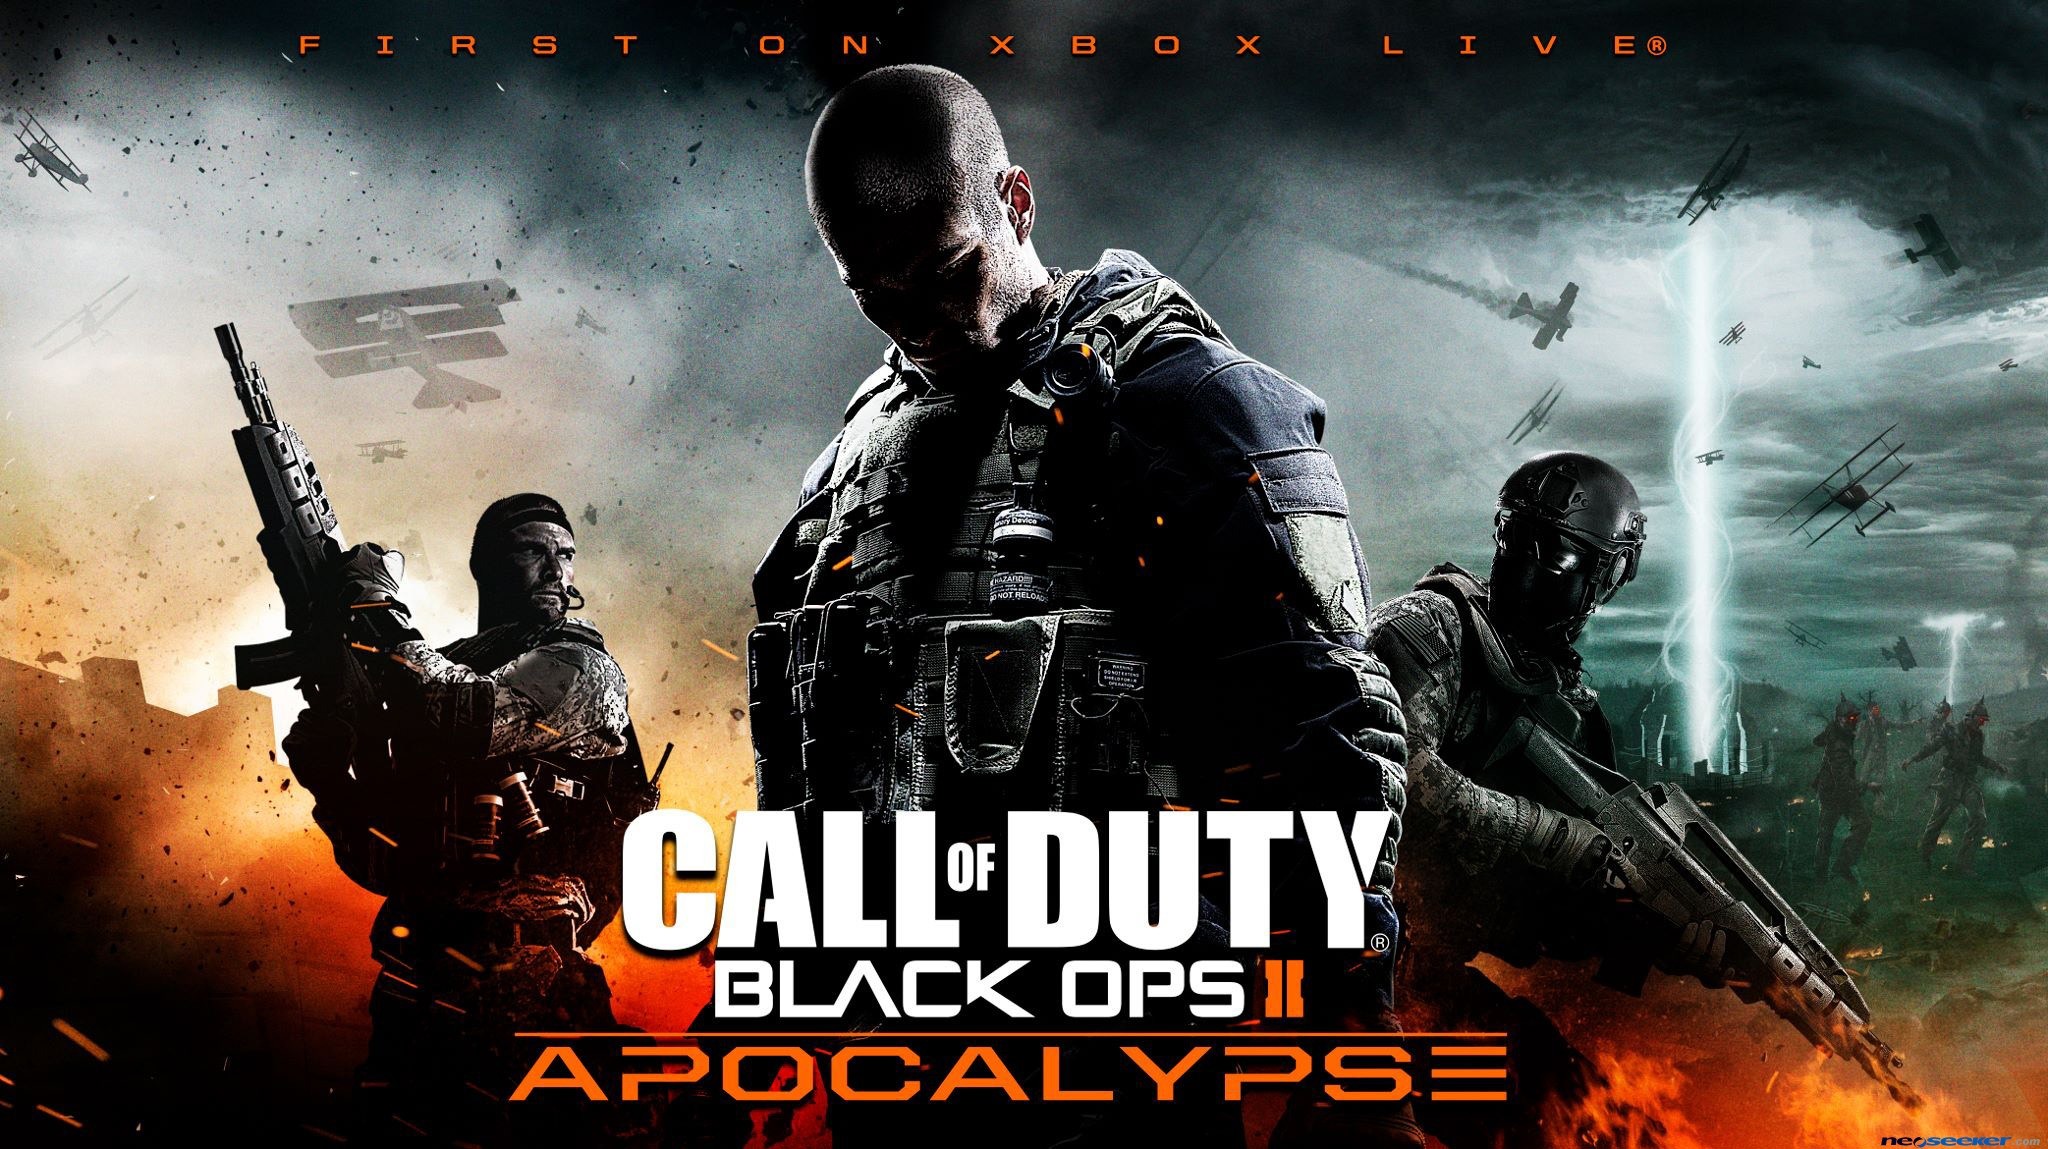 2048x1149 Call of Duty: Black Ops 2 DLC wraps up with 'Apocalypse', brings